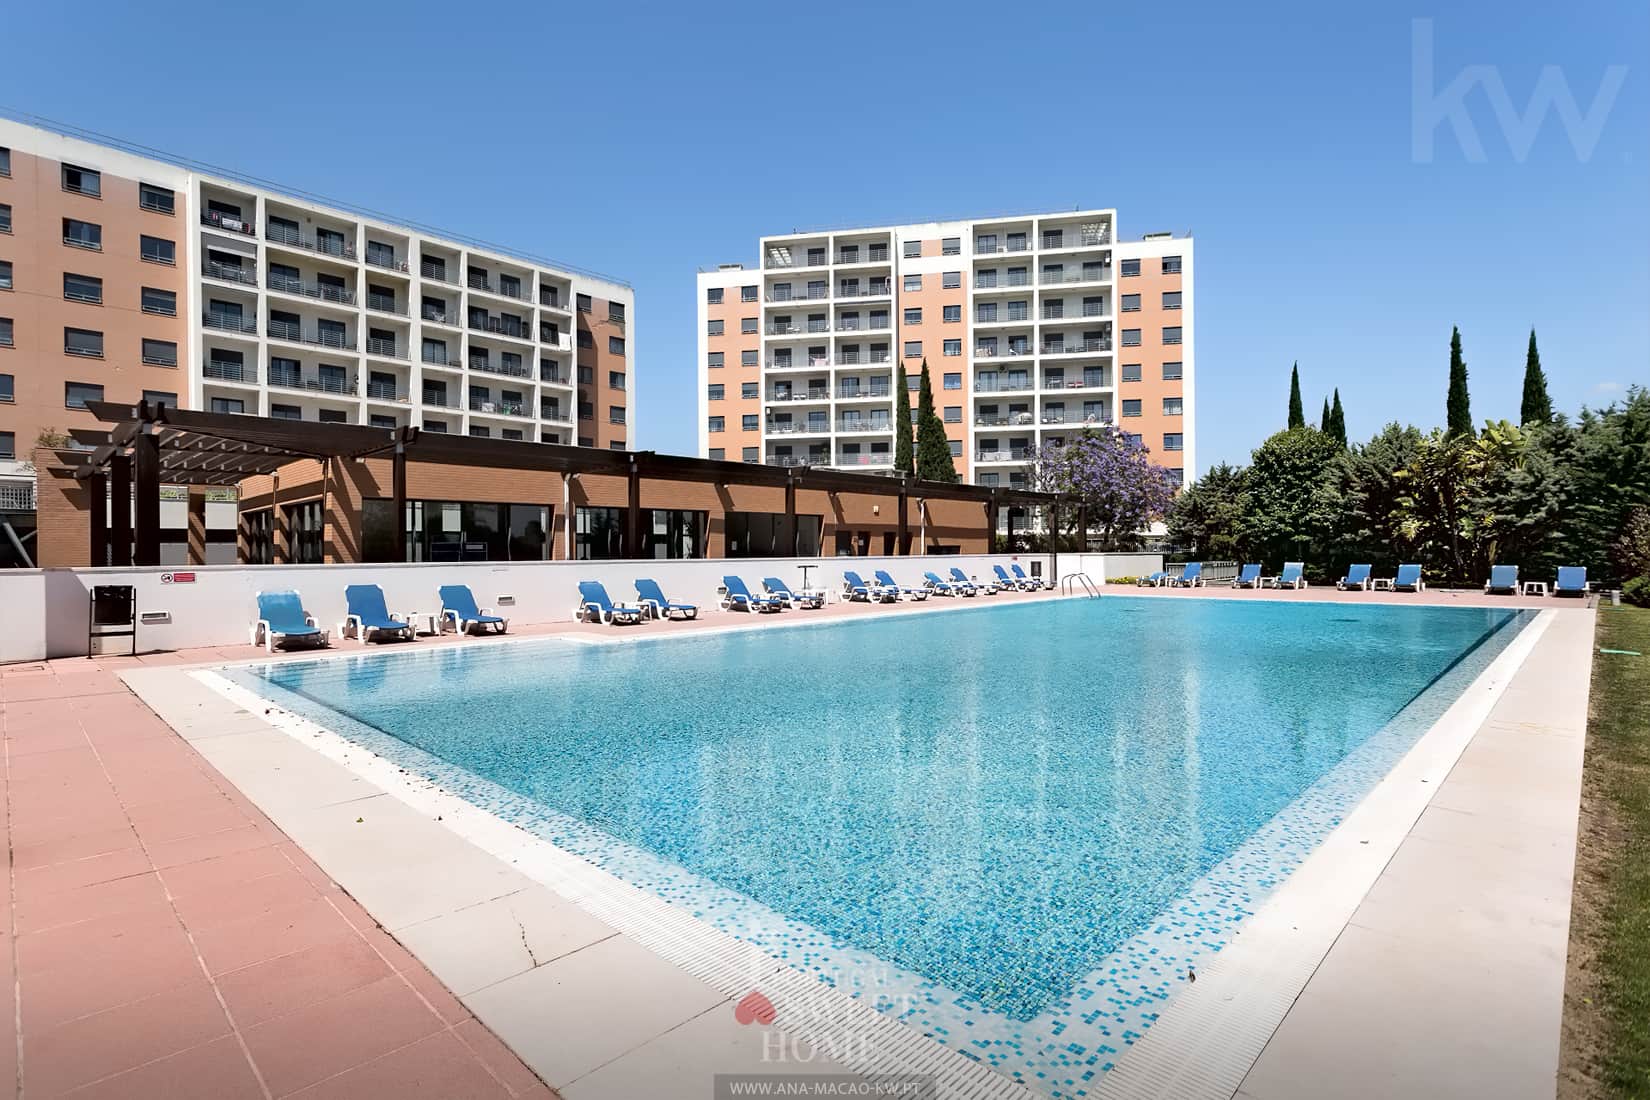 2 swimming pools in the condominium, one for adults and one for children